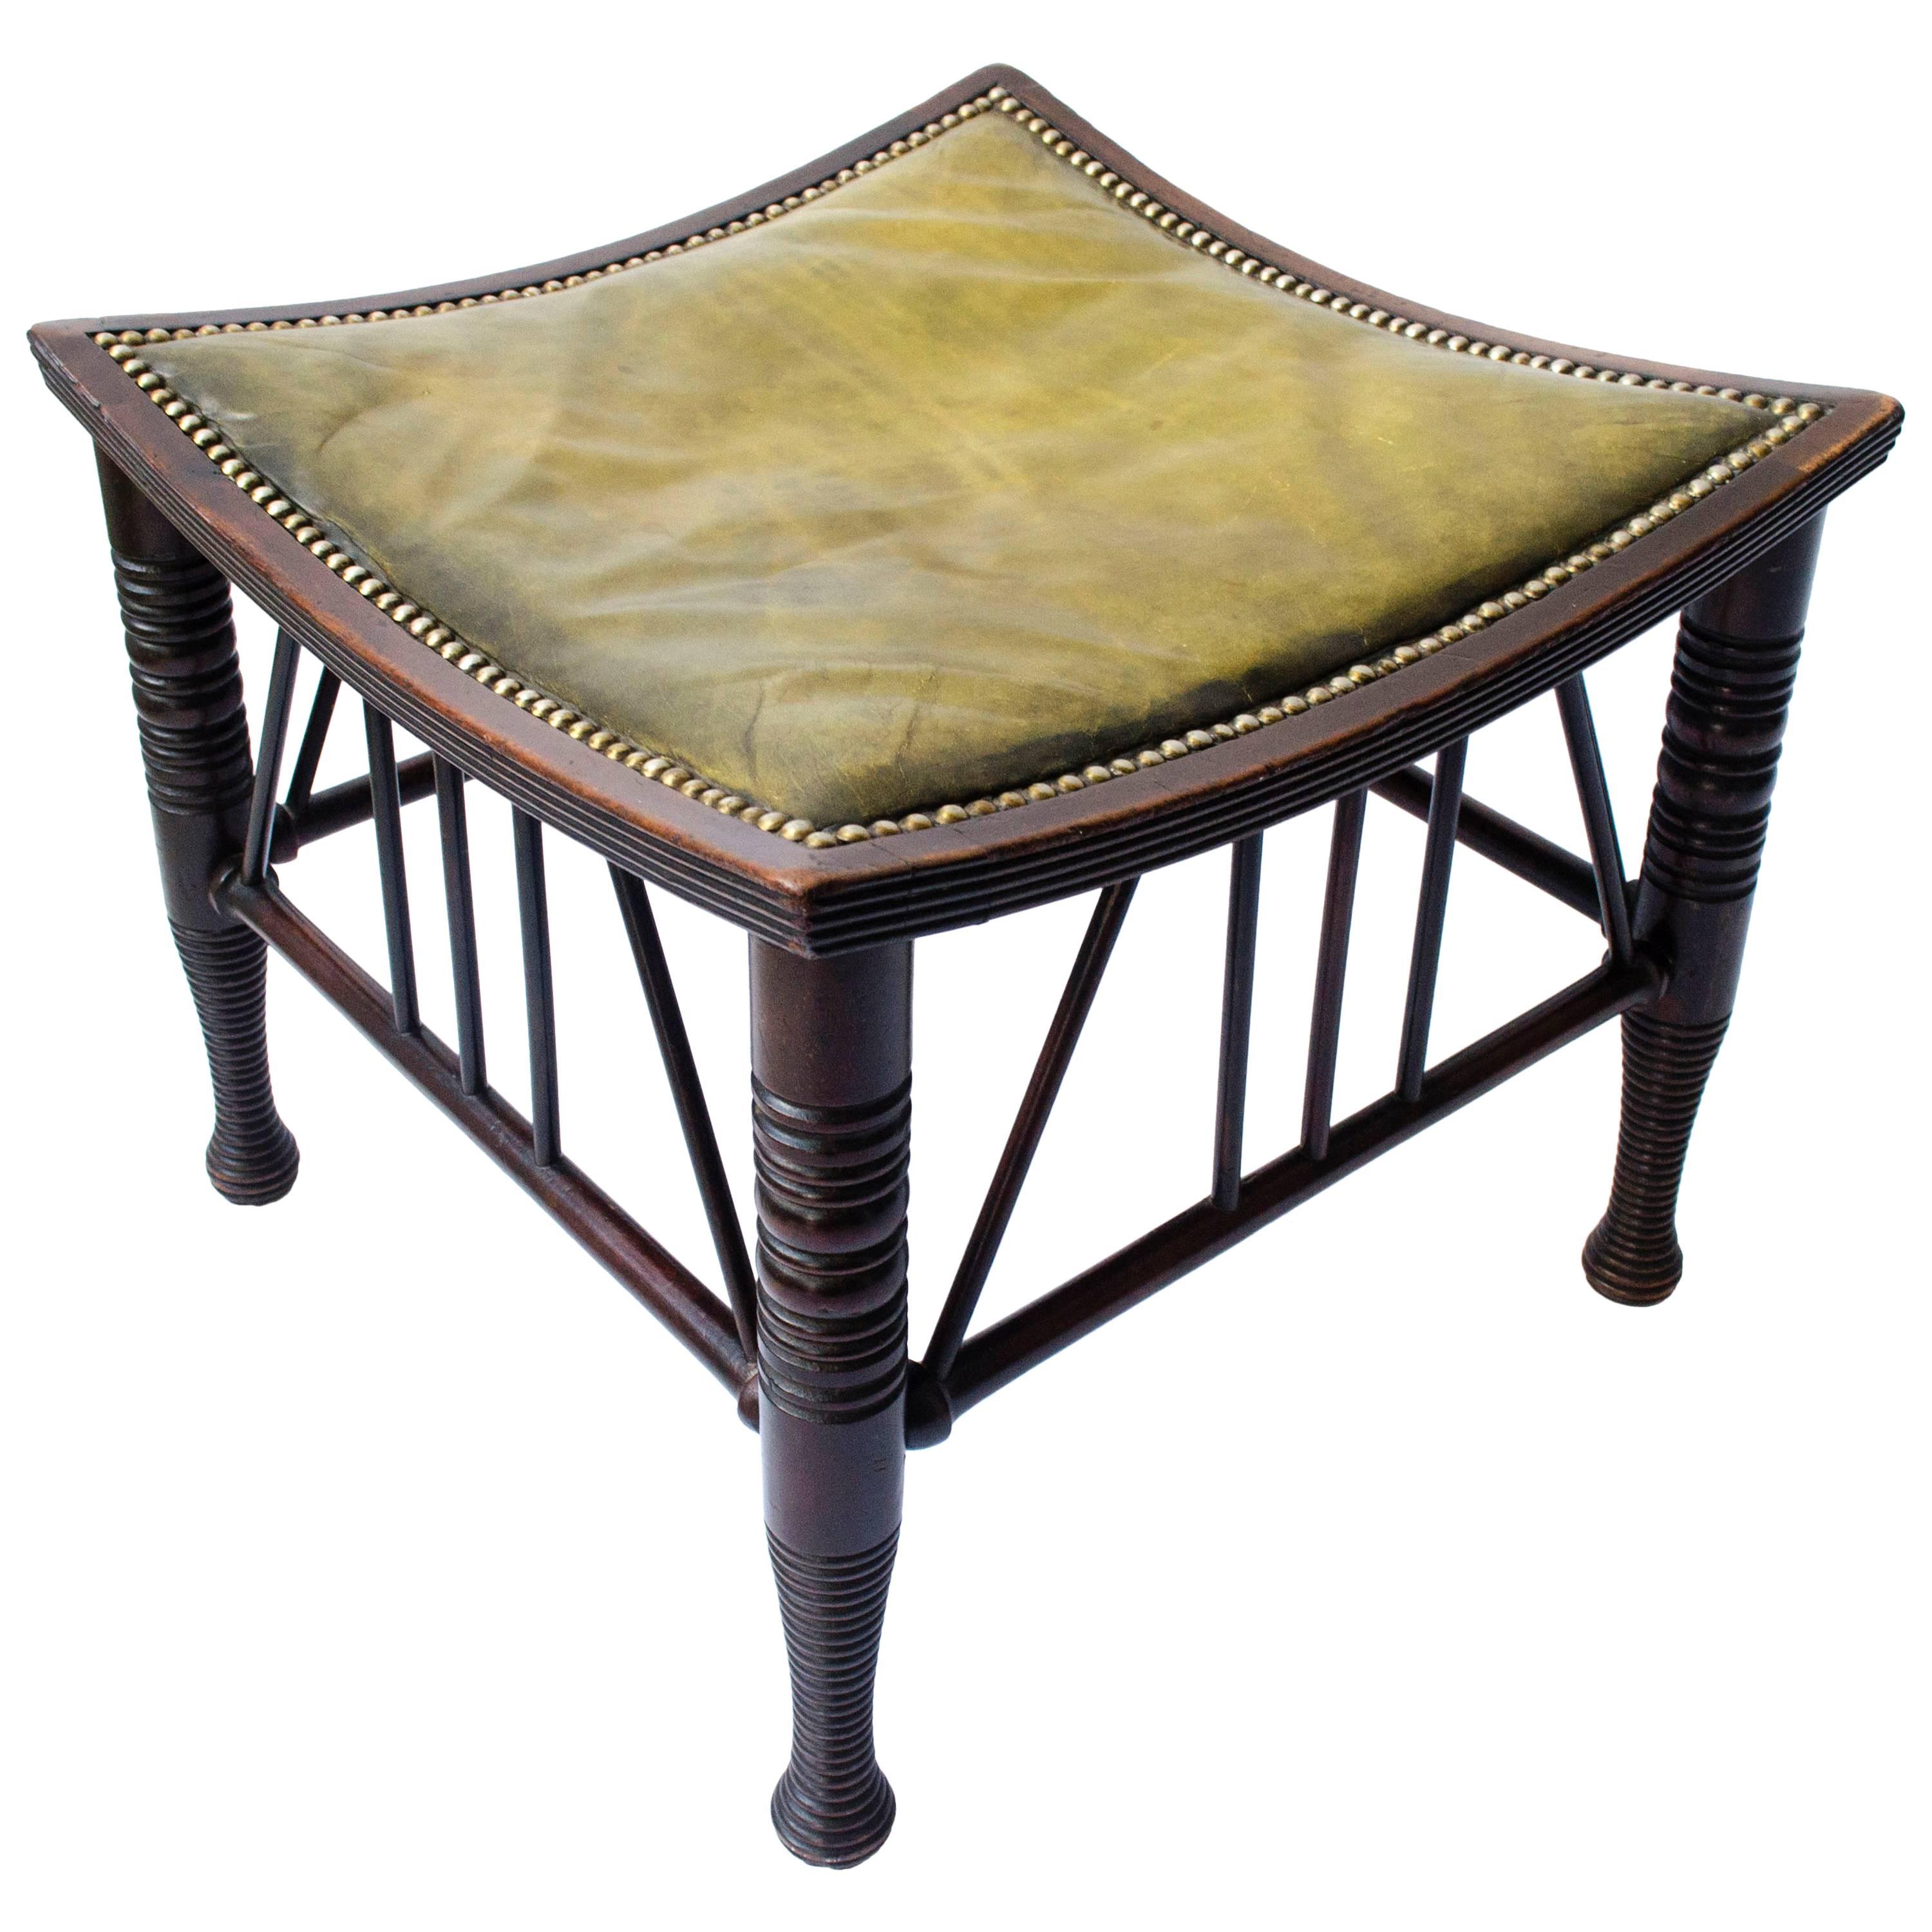 Liberty & Co A Large Size Walnut Thebes Stool with ring turned legs & stretchers For Sale